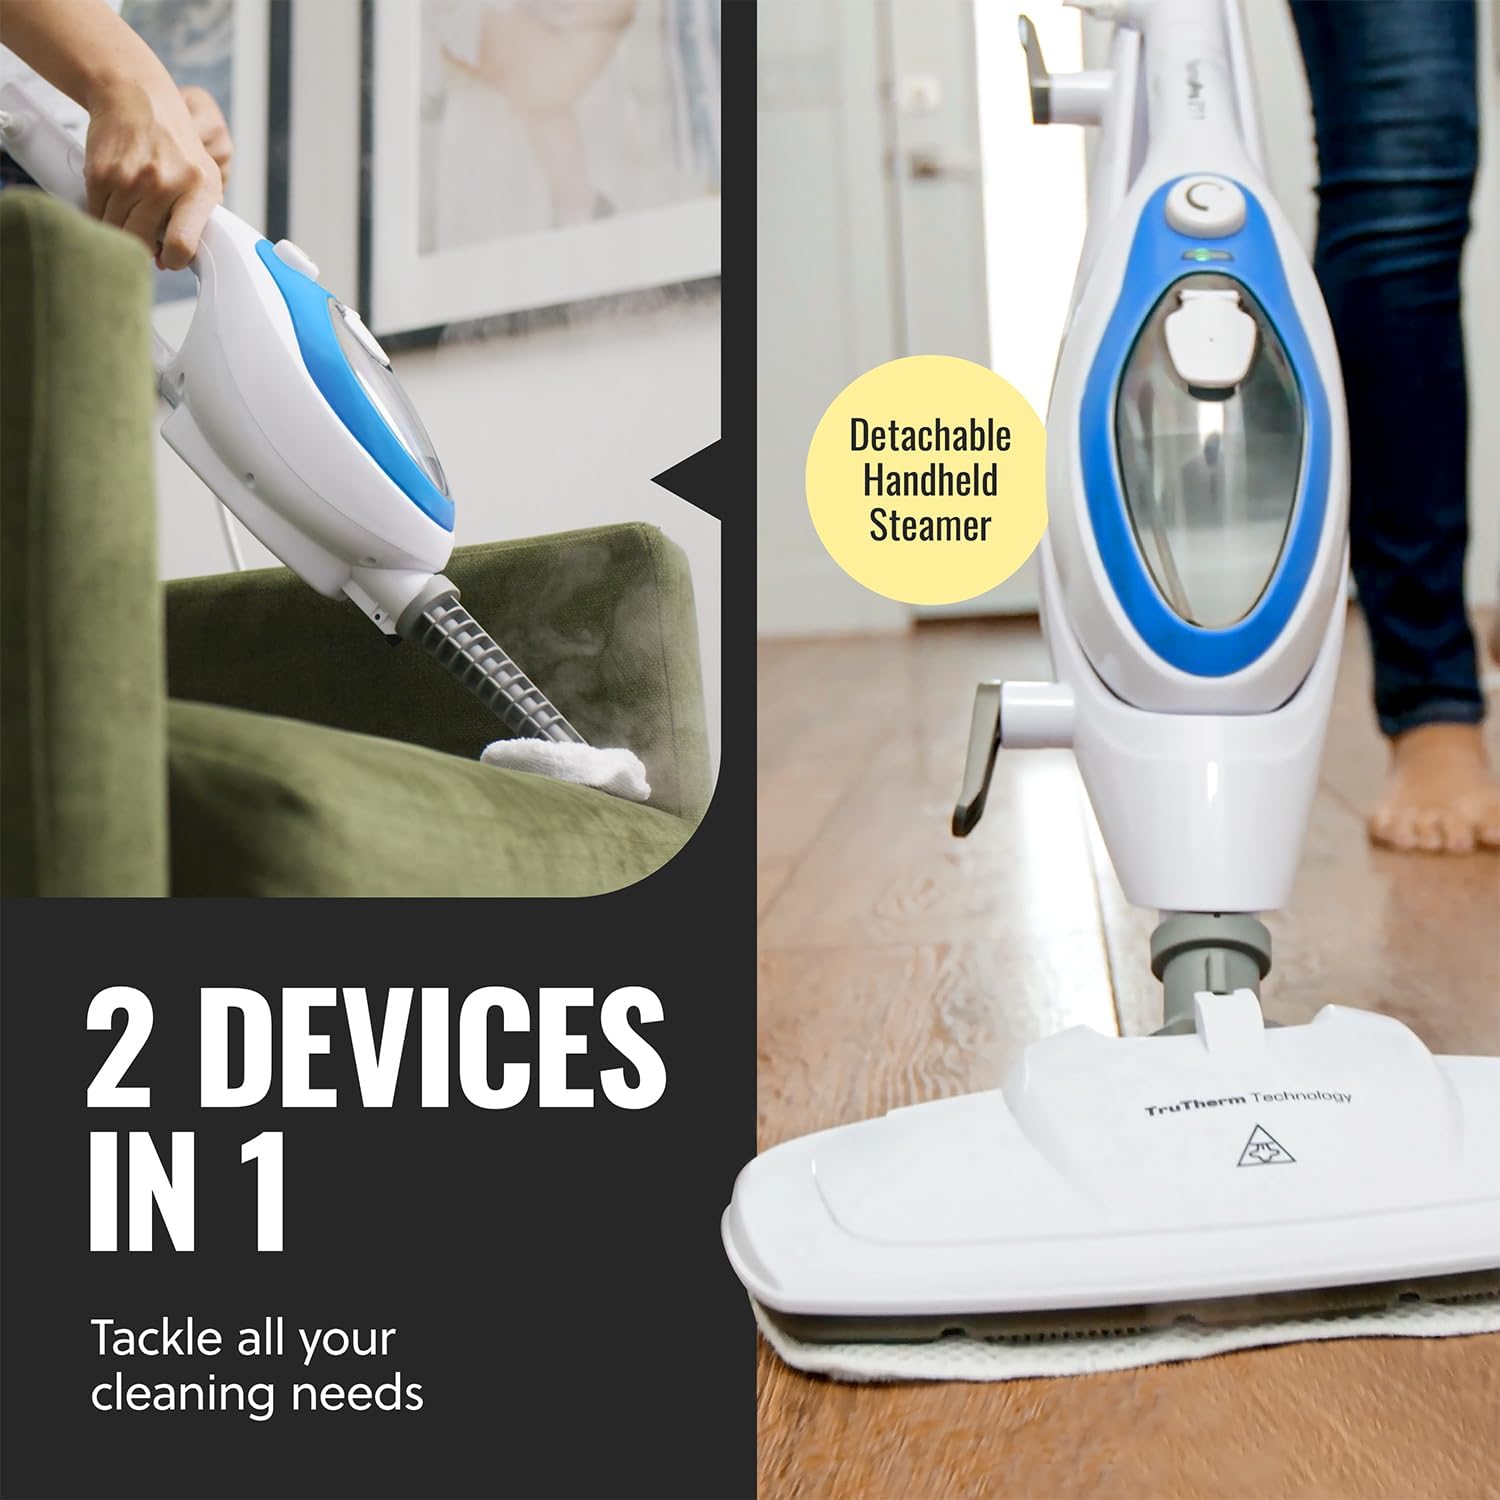 Buy H2O HD 5-in-1 Steam Mop and Handheld Steam Cleaner